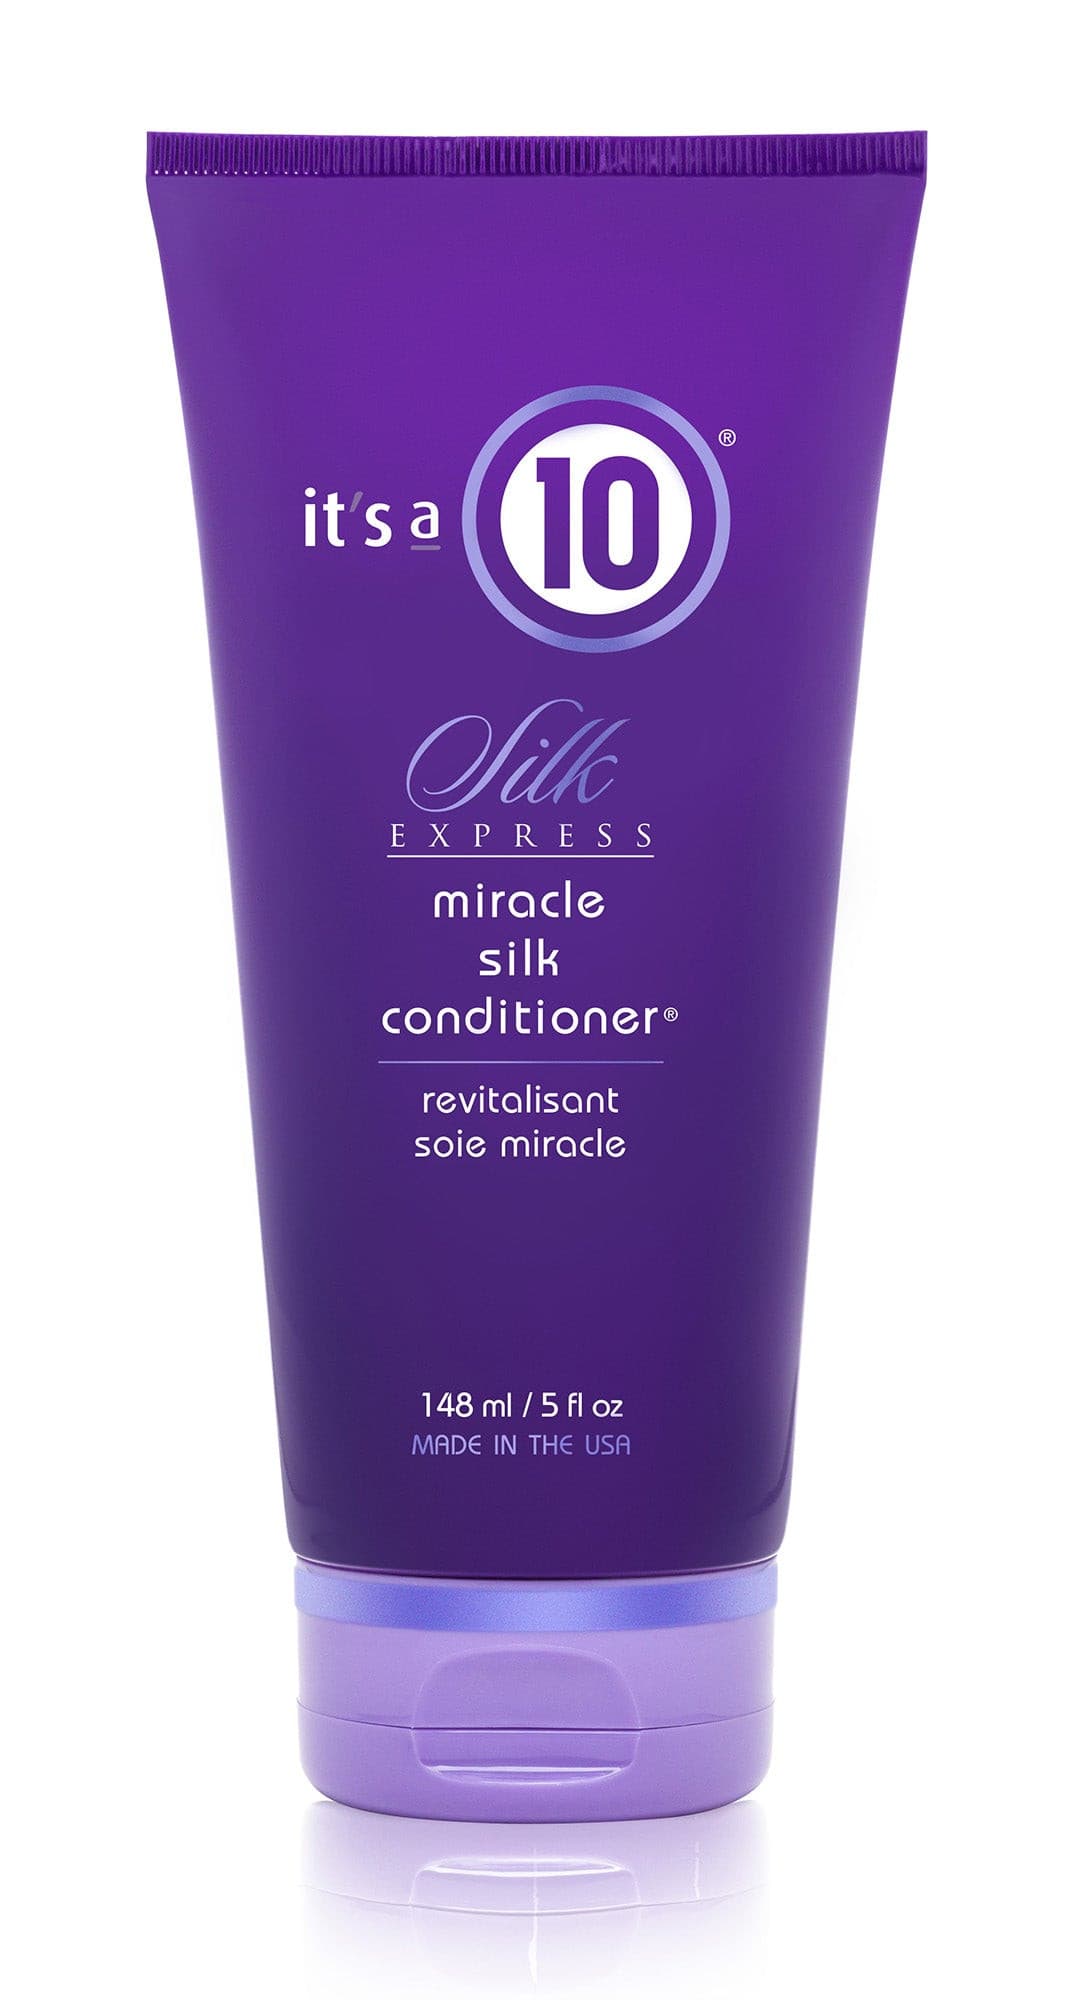 Miracle Moisture Daily Conditioner - It's A 10